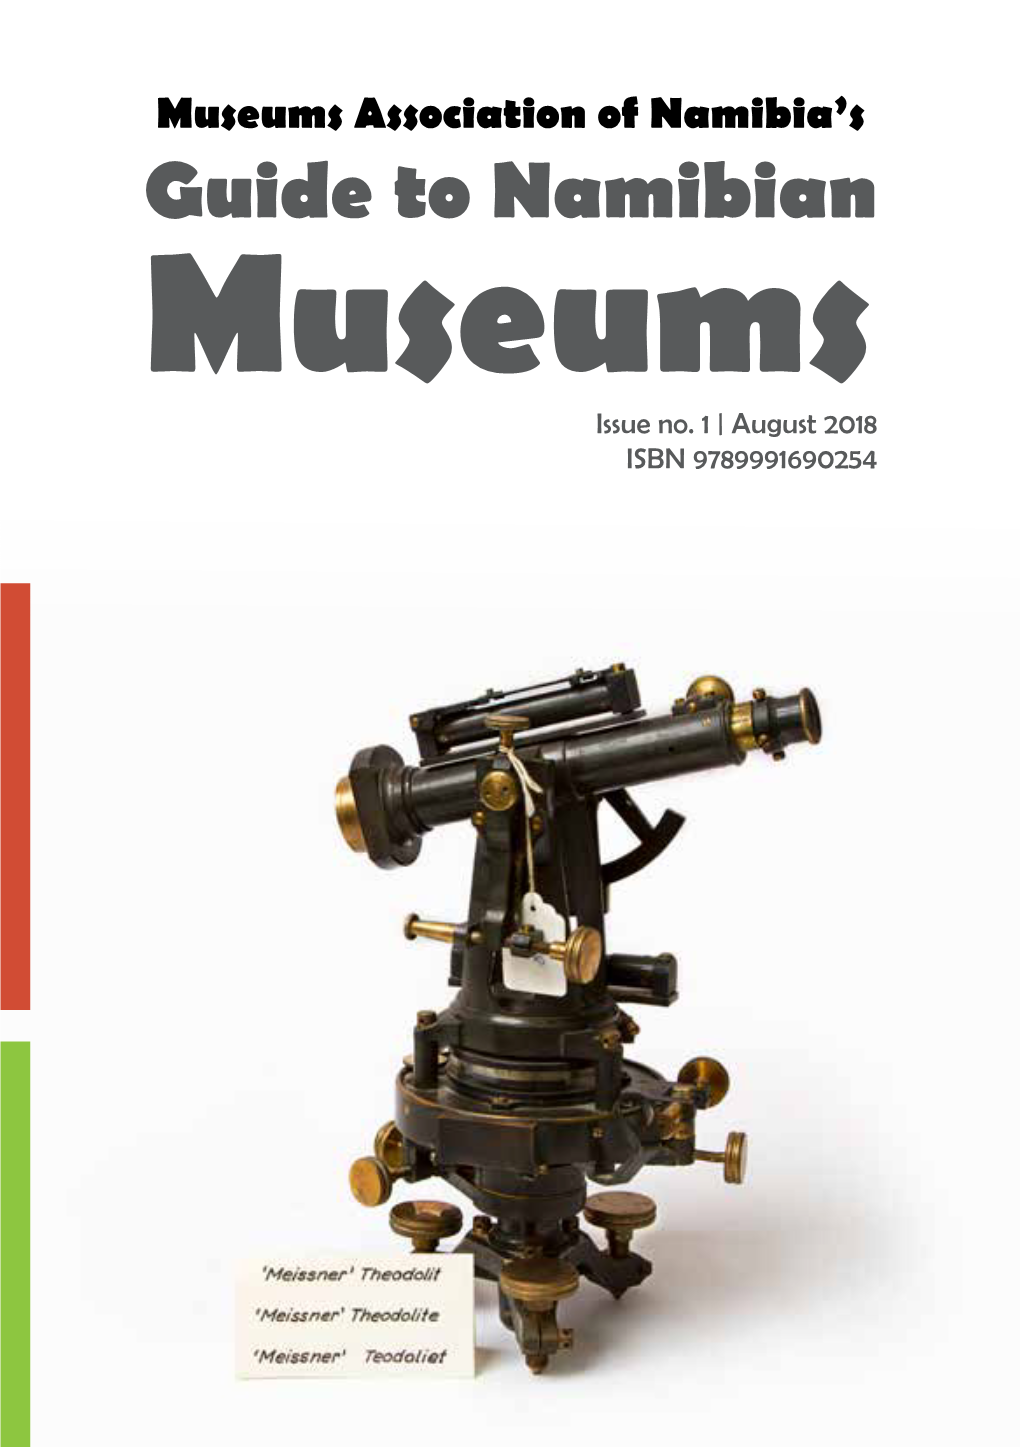 Guide to Namibian Museums Issue No